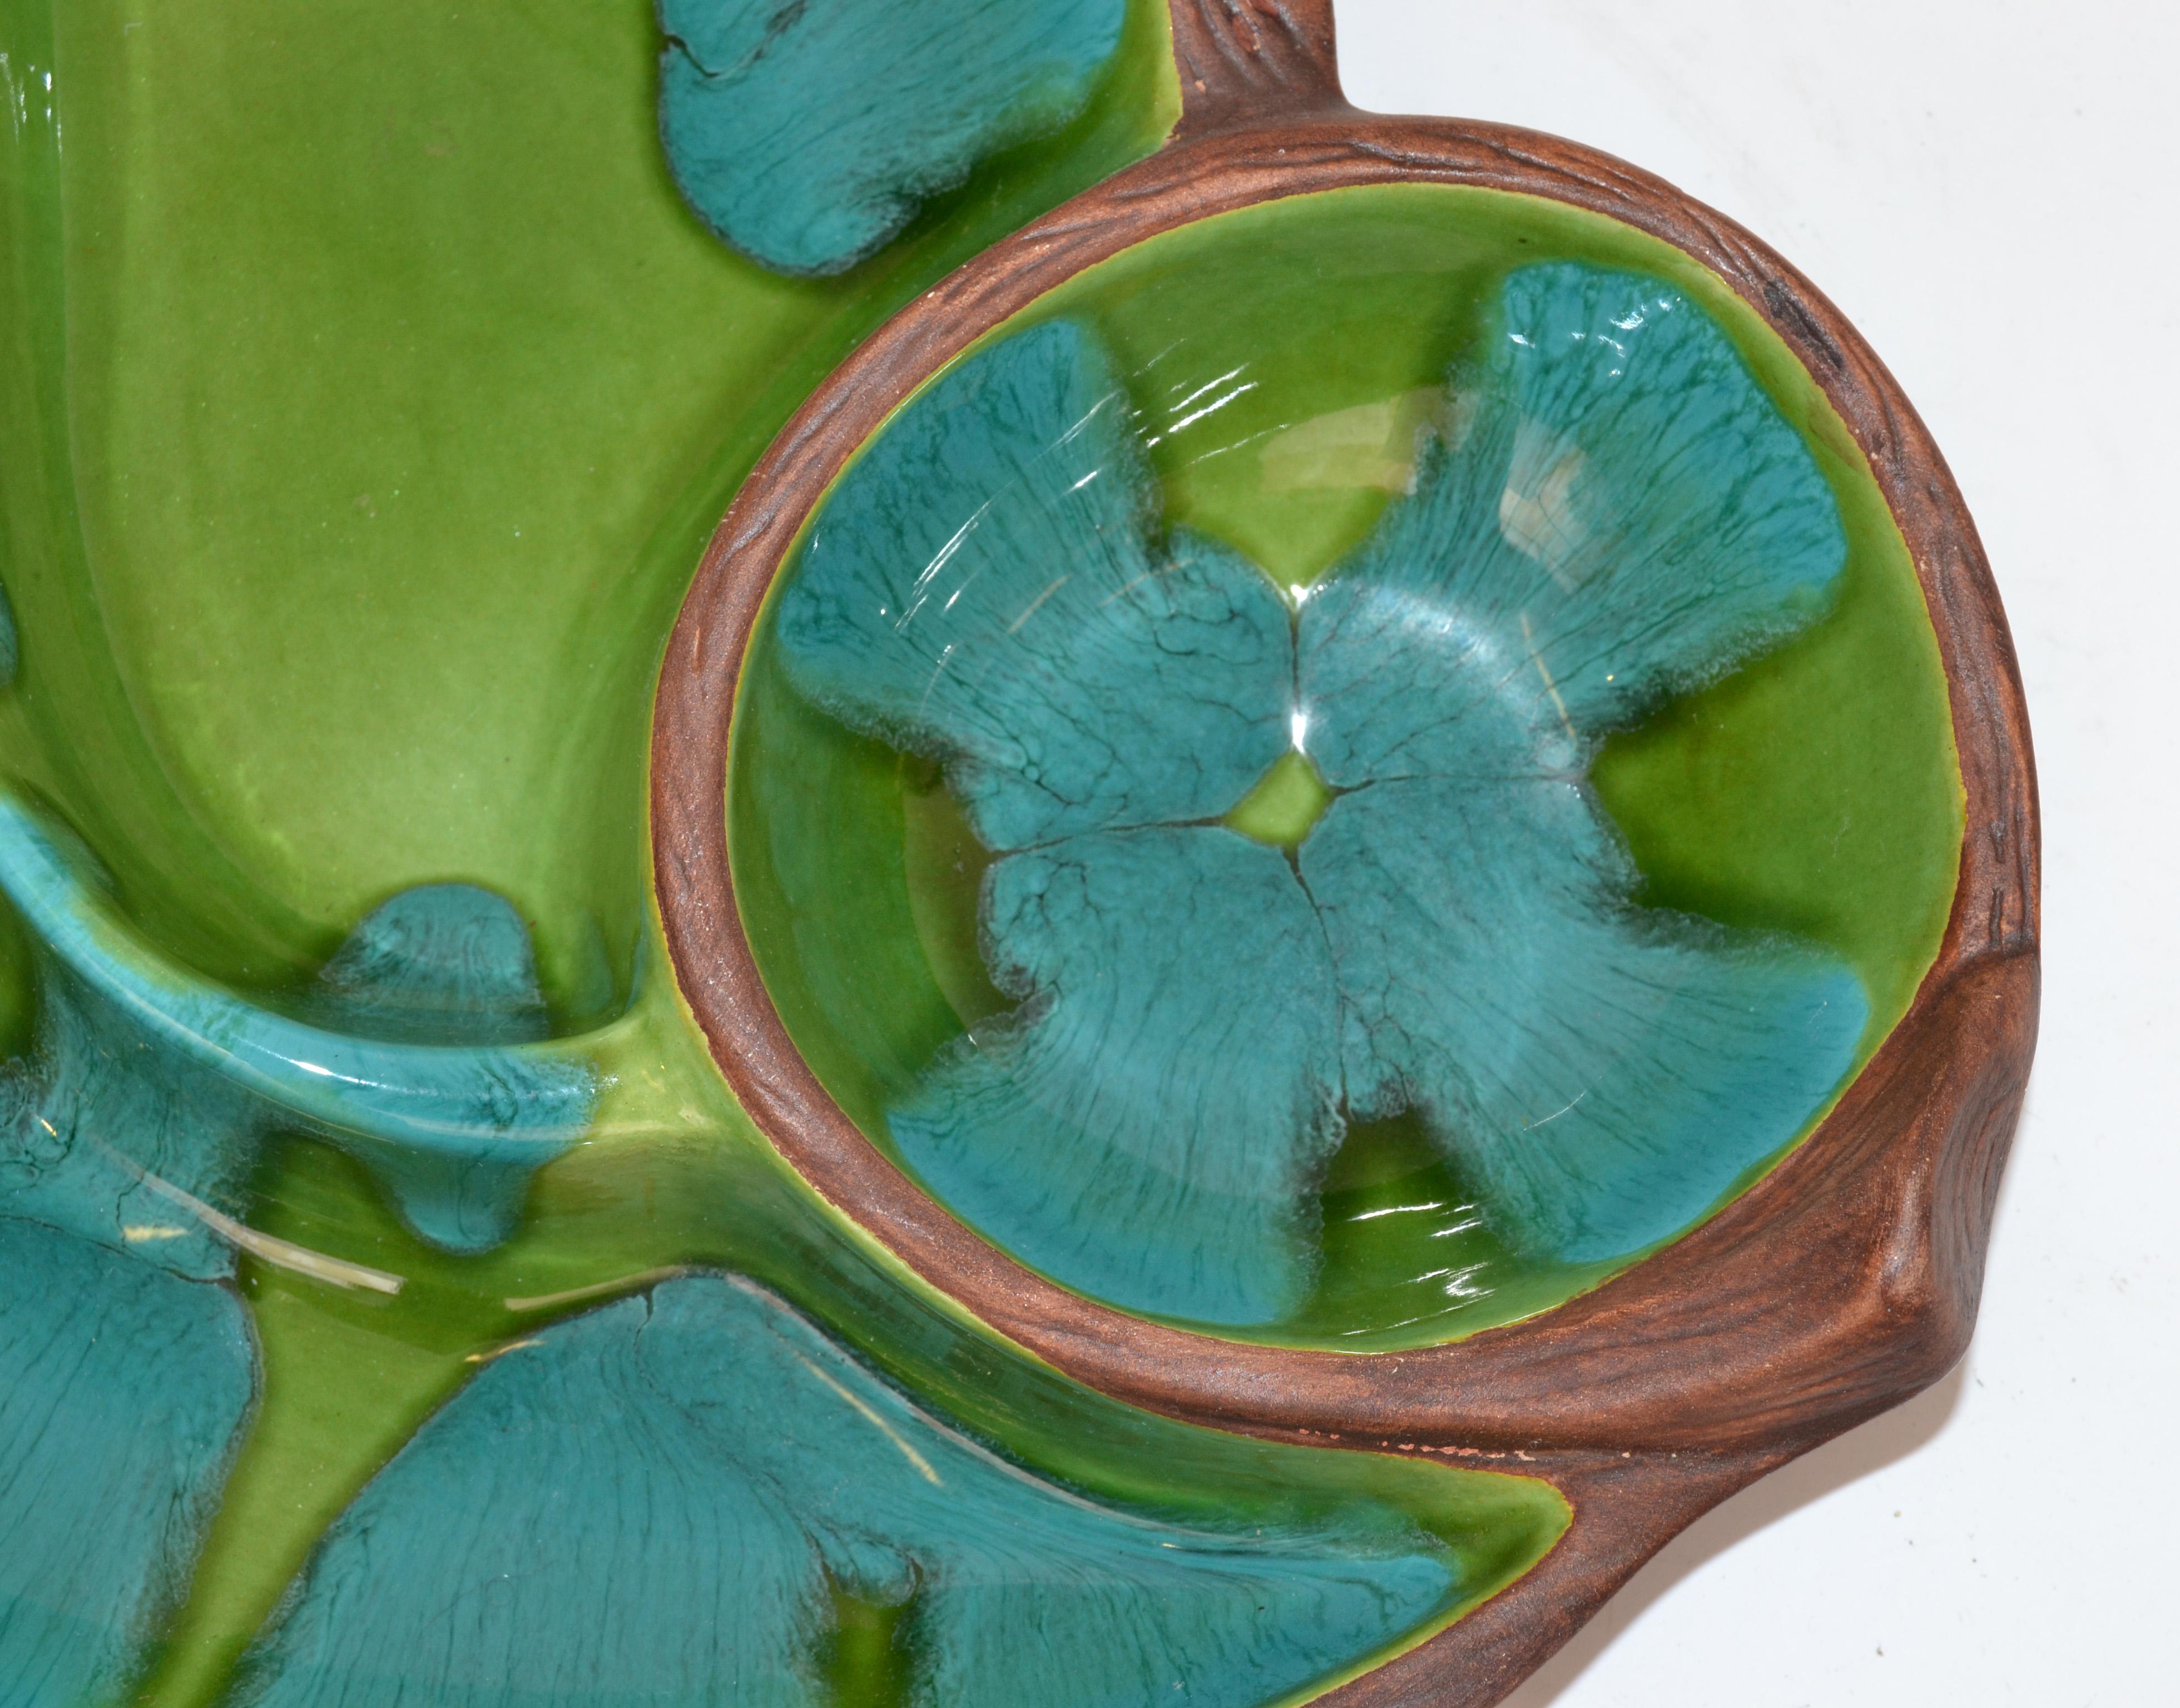 Late 20th Century Brown Green Turquoise Glazed Ceramic Pottery Dish Mid-Century Modern, USA For Sale